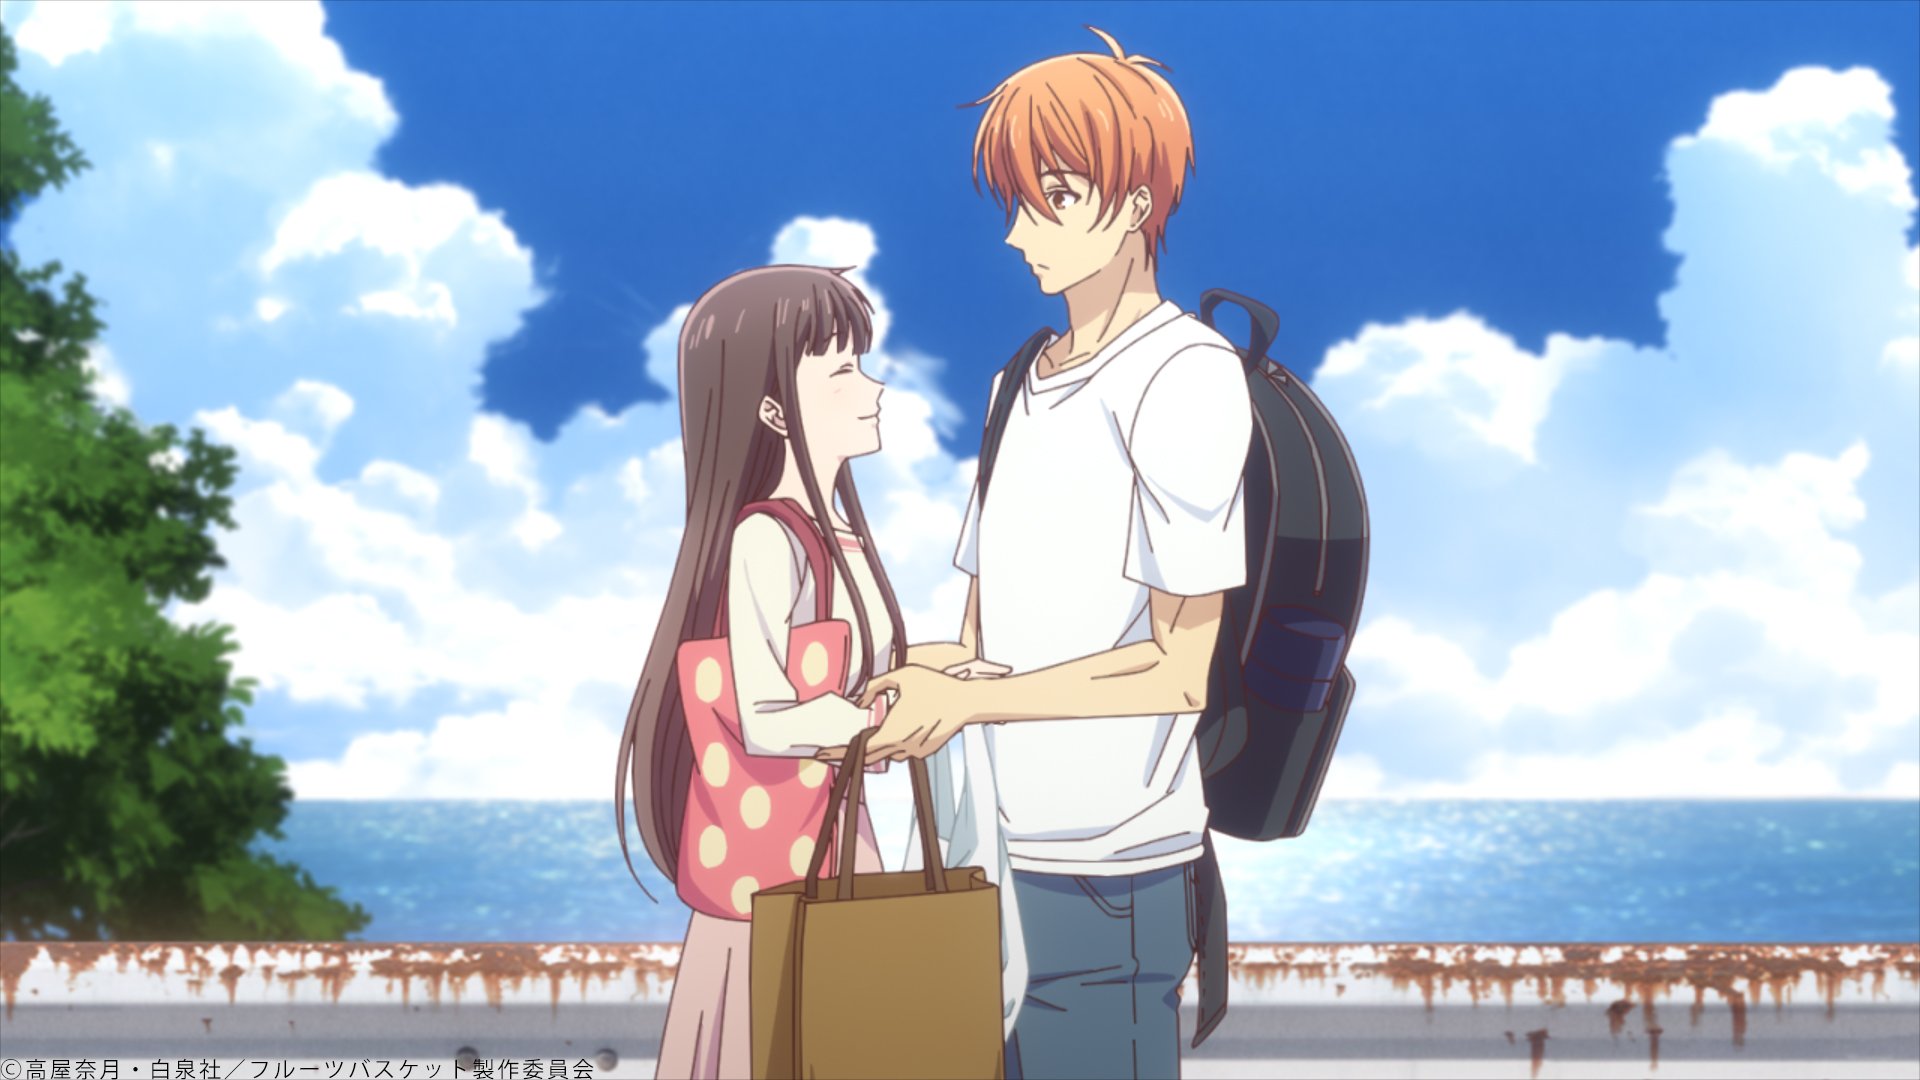 Fruits Basket Manga Gets New Spin-off Anime, Stage Play in 2022